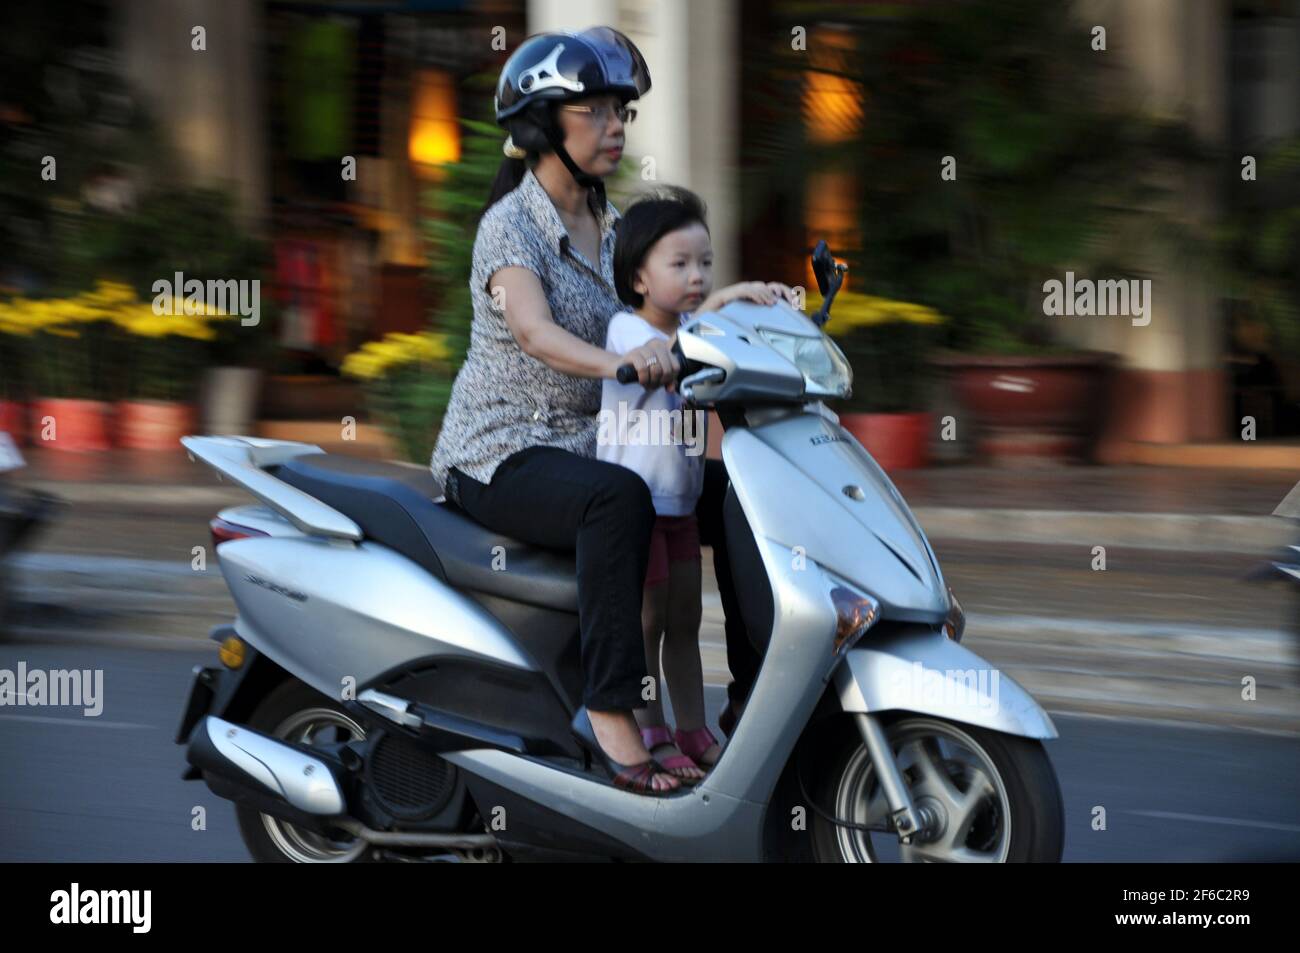 CAN THO, VIETNAM - FEBRUARY 17, 2013: Local people with motorbike driving in the biggest city of the Mekong delta, where the traffic is often congeste Stock Photo